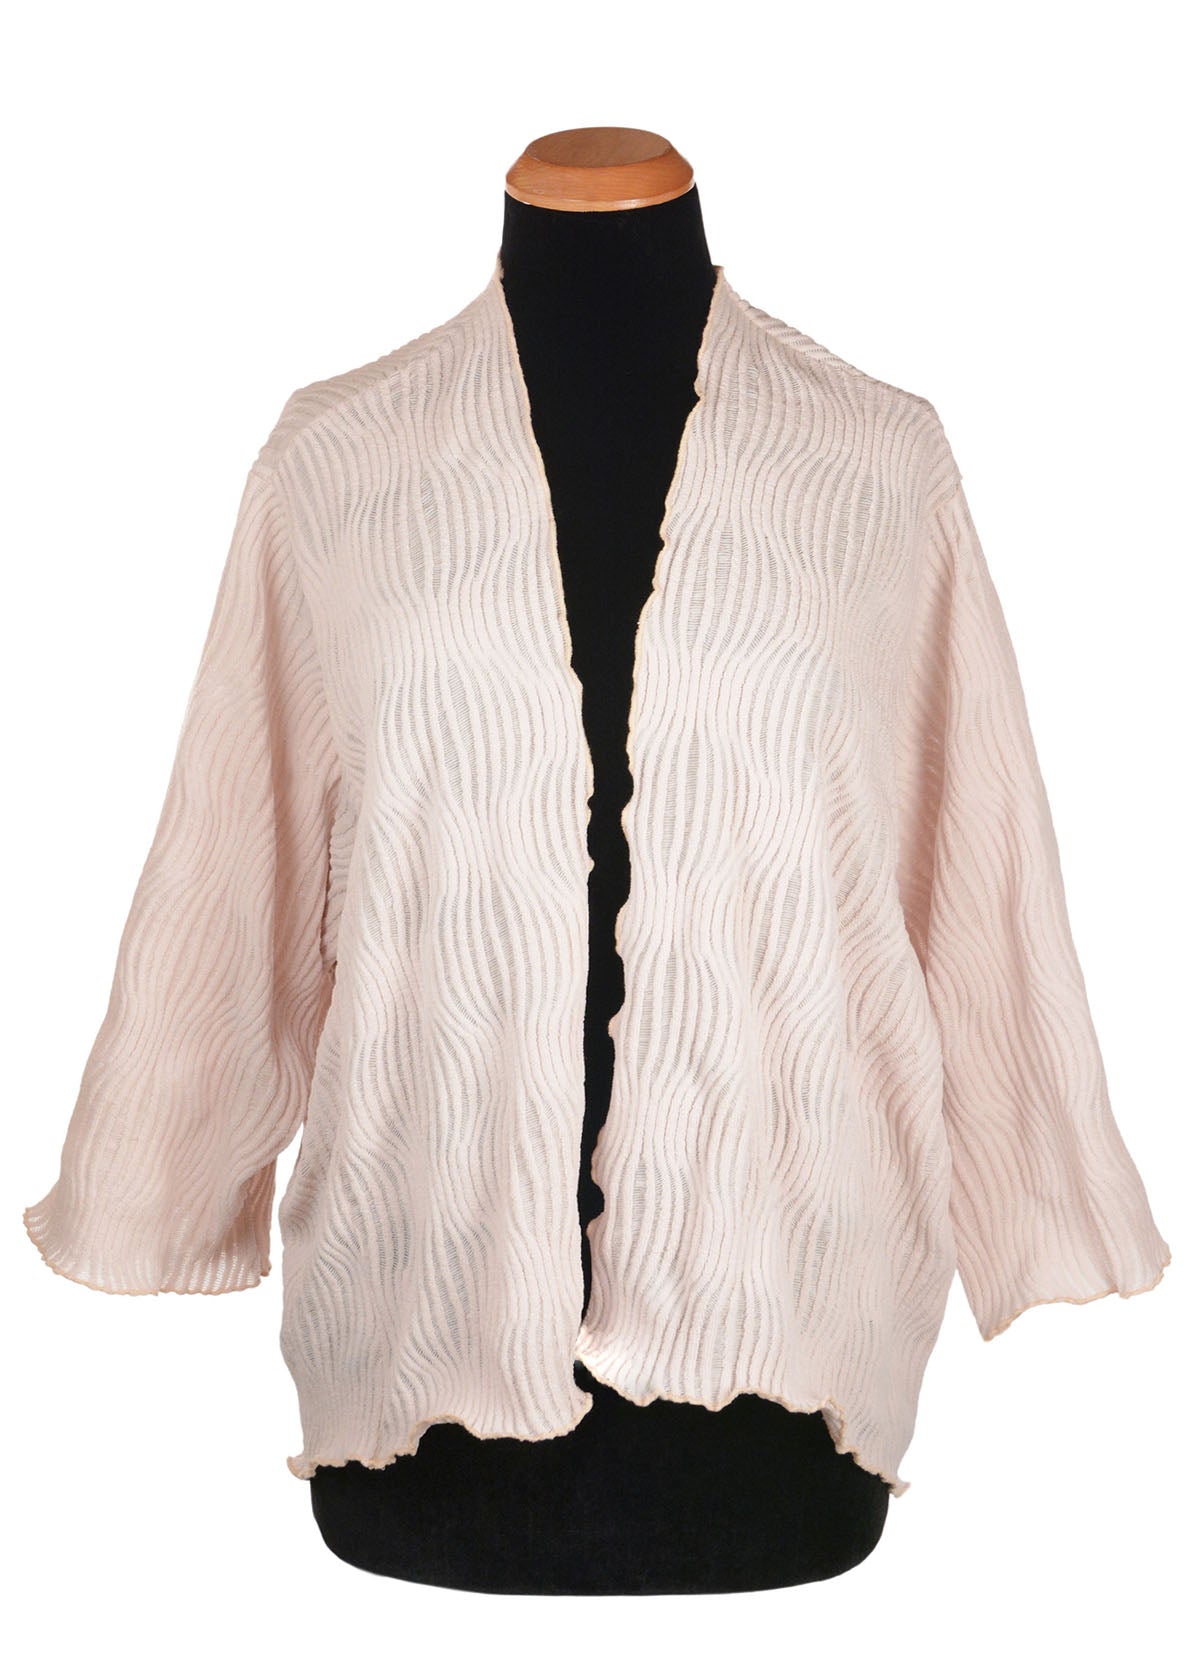 Product photo of the Fractal Collection Blush Cardigan. LYC by Pandemonium is handmade in Seattle, WA, USA.